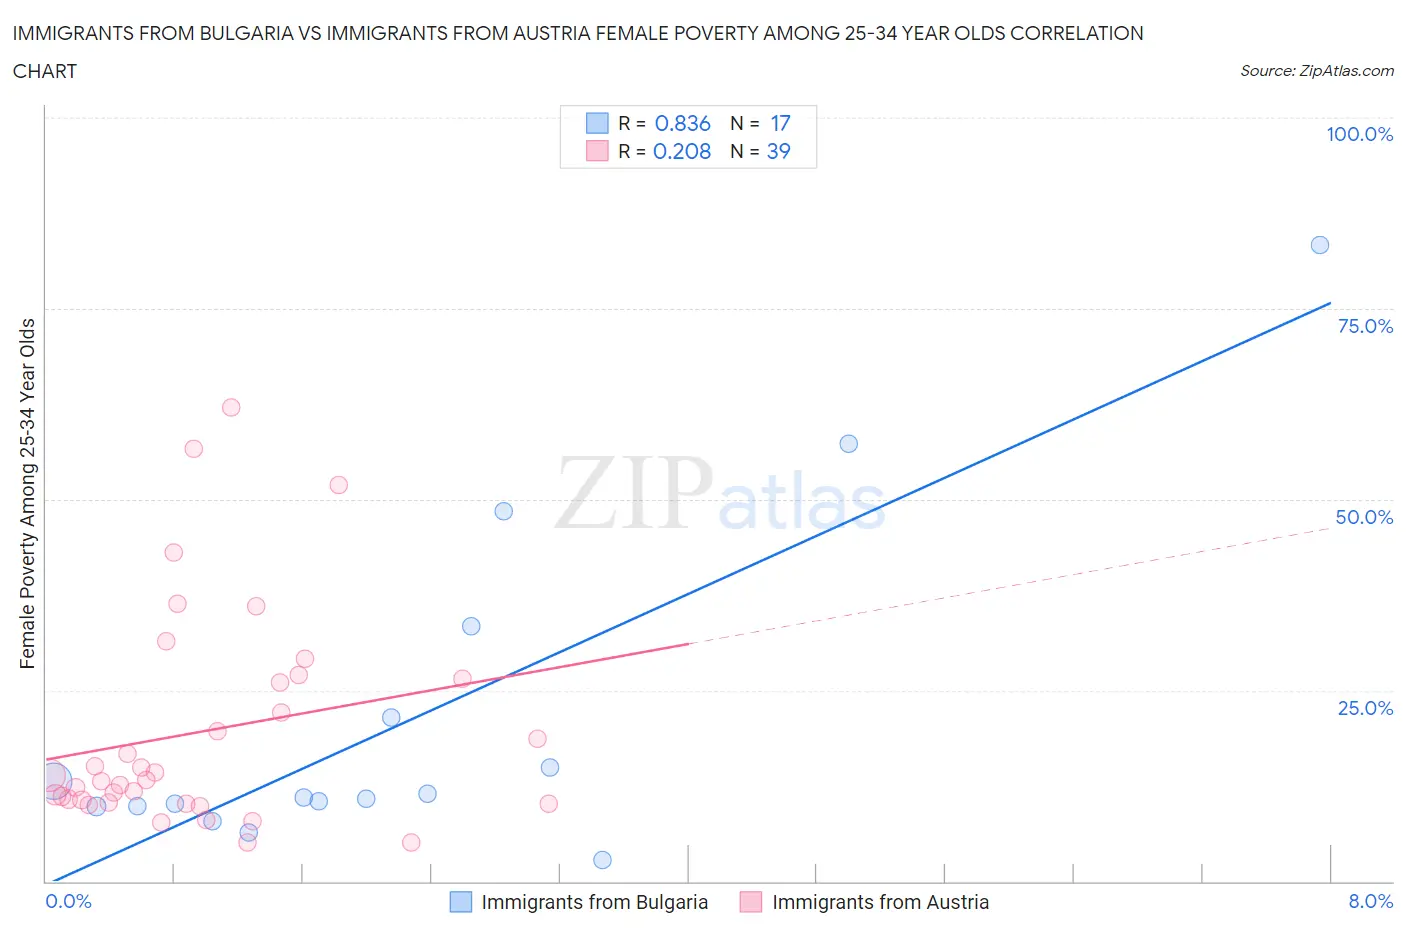 Immigrants from Bulgaria vs Immigrants from Austria Female Poverty Among 25-34 Year Olds